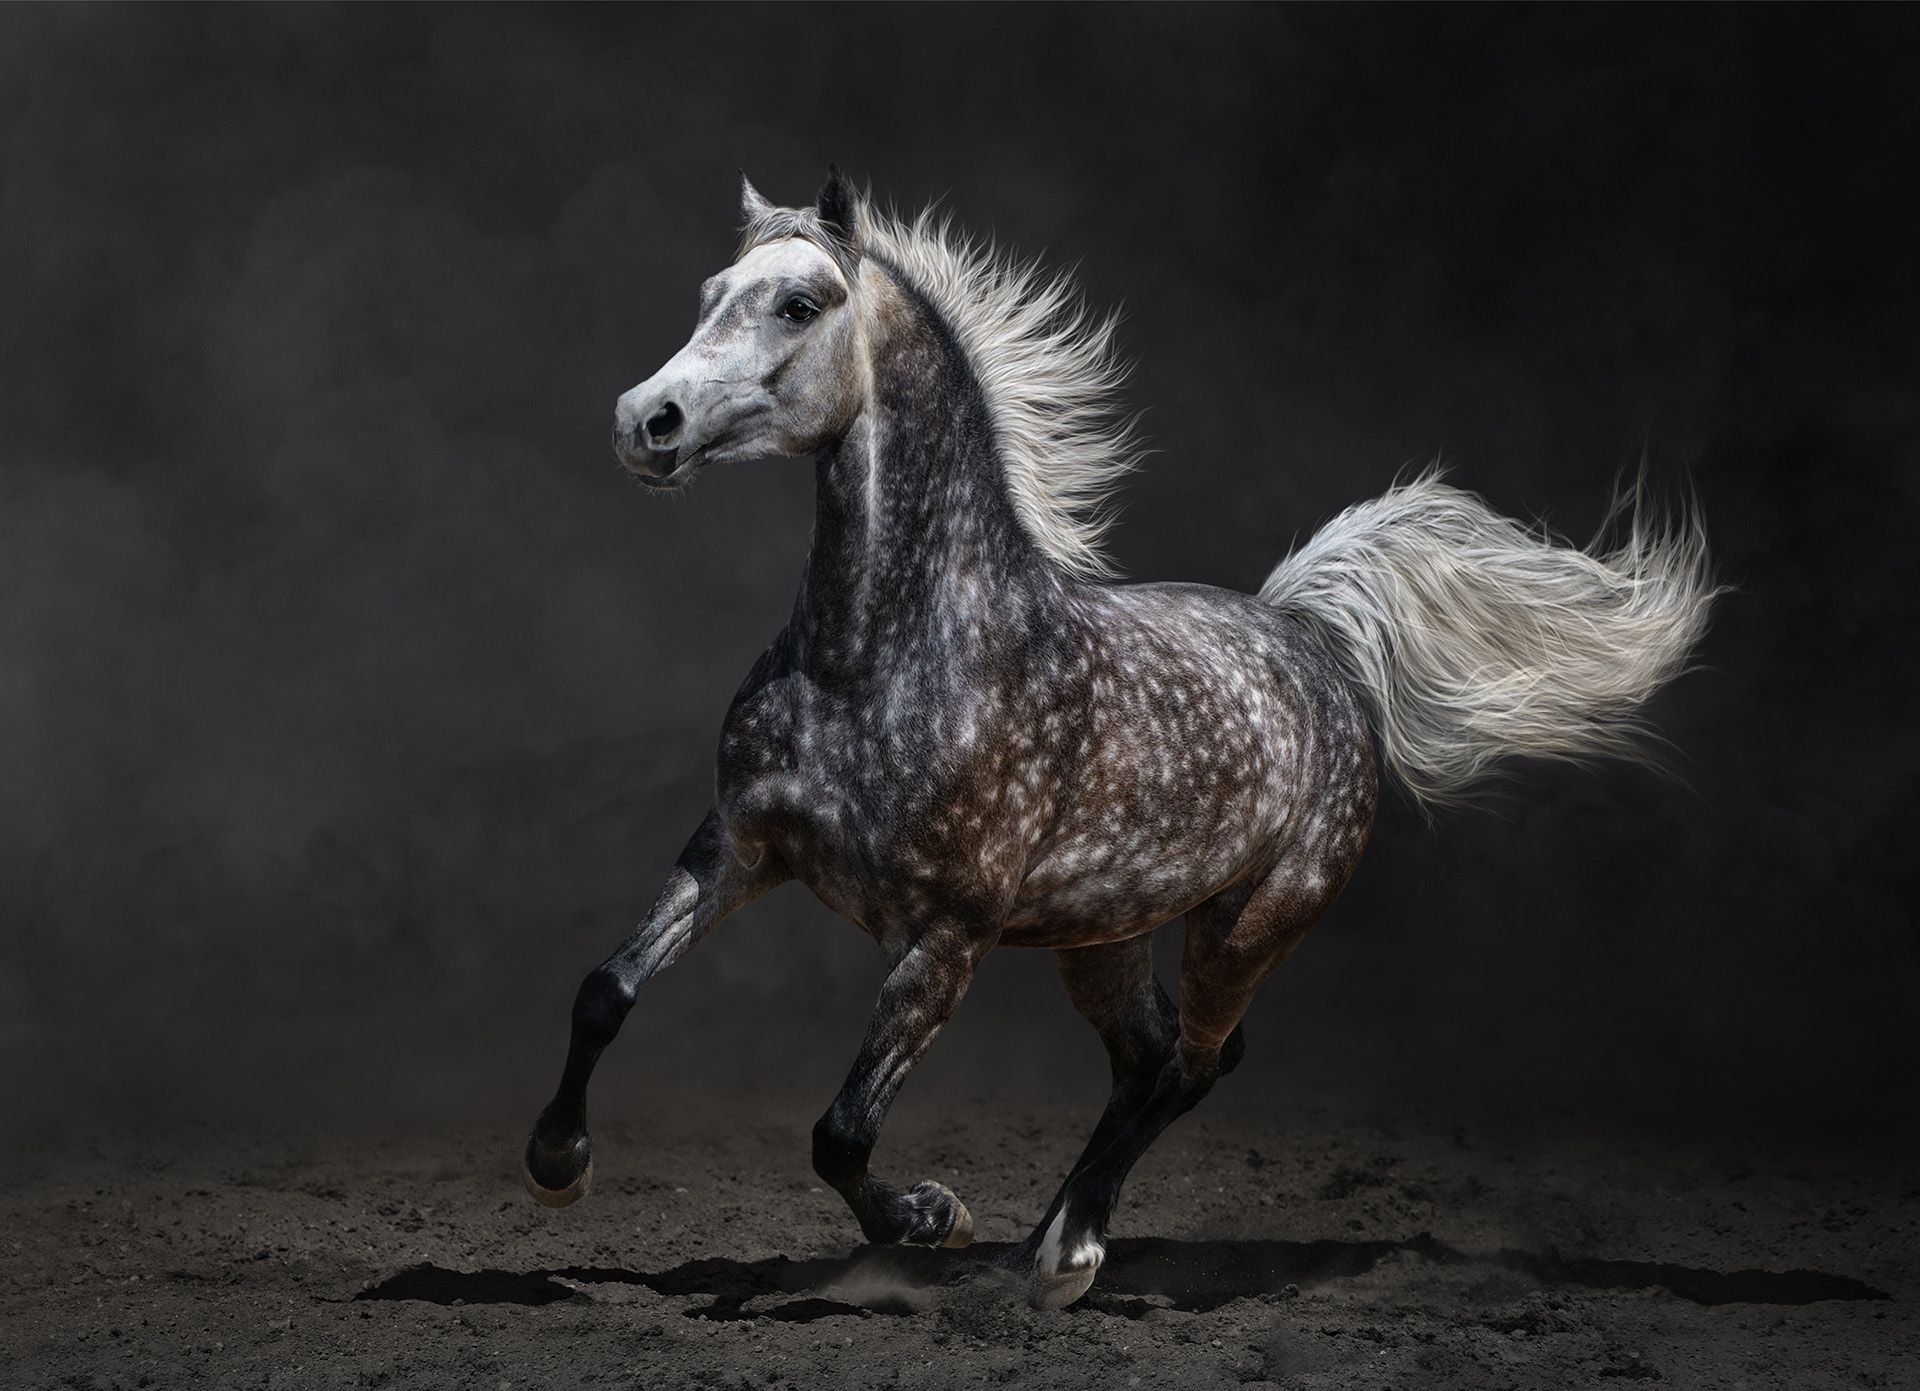 Free download Choose Beautiful Wild Horse HD or find similar